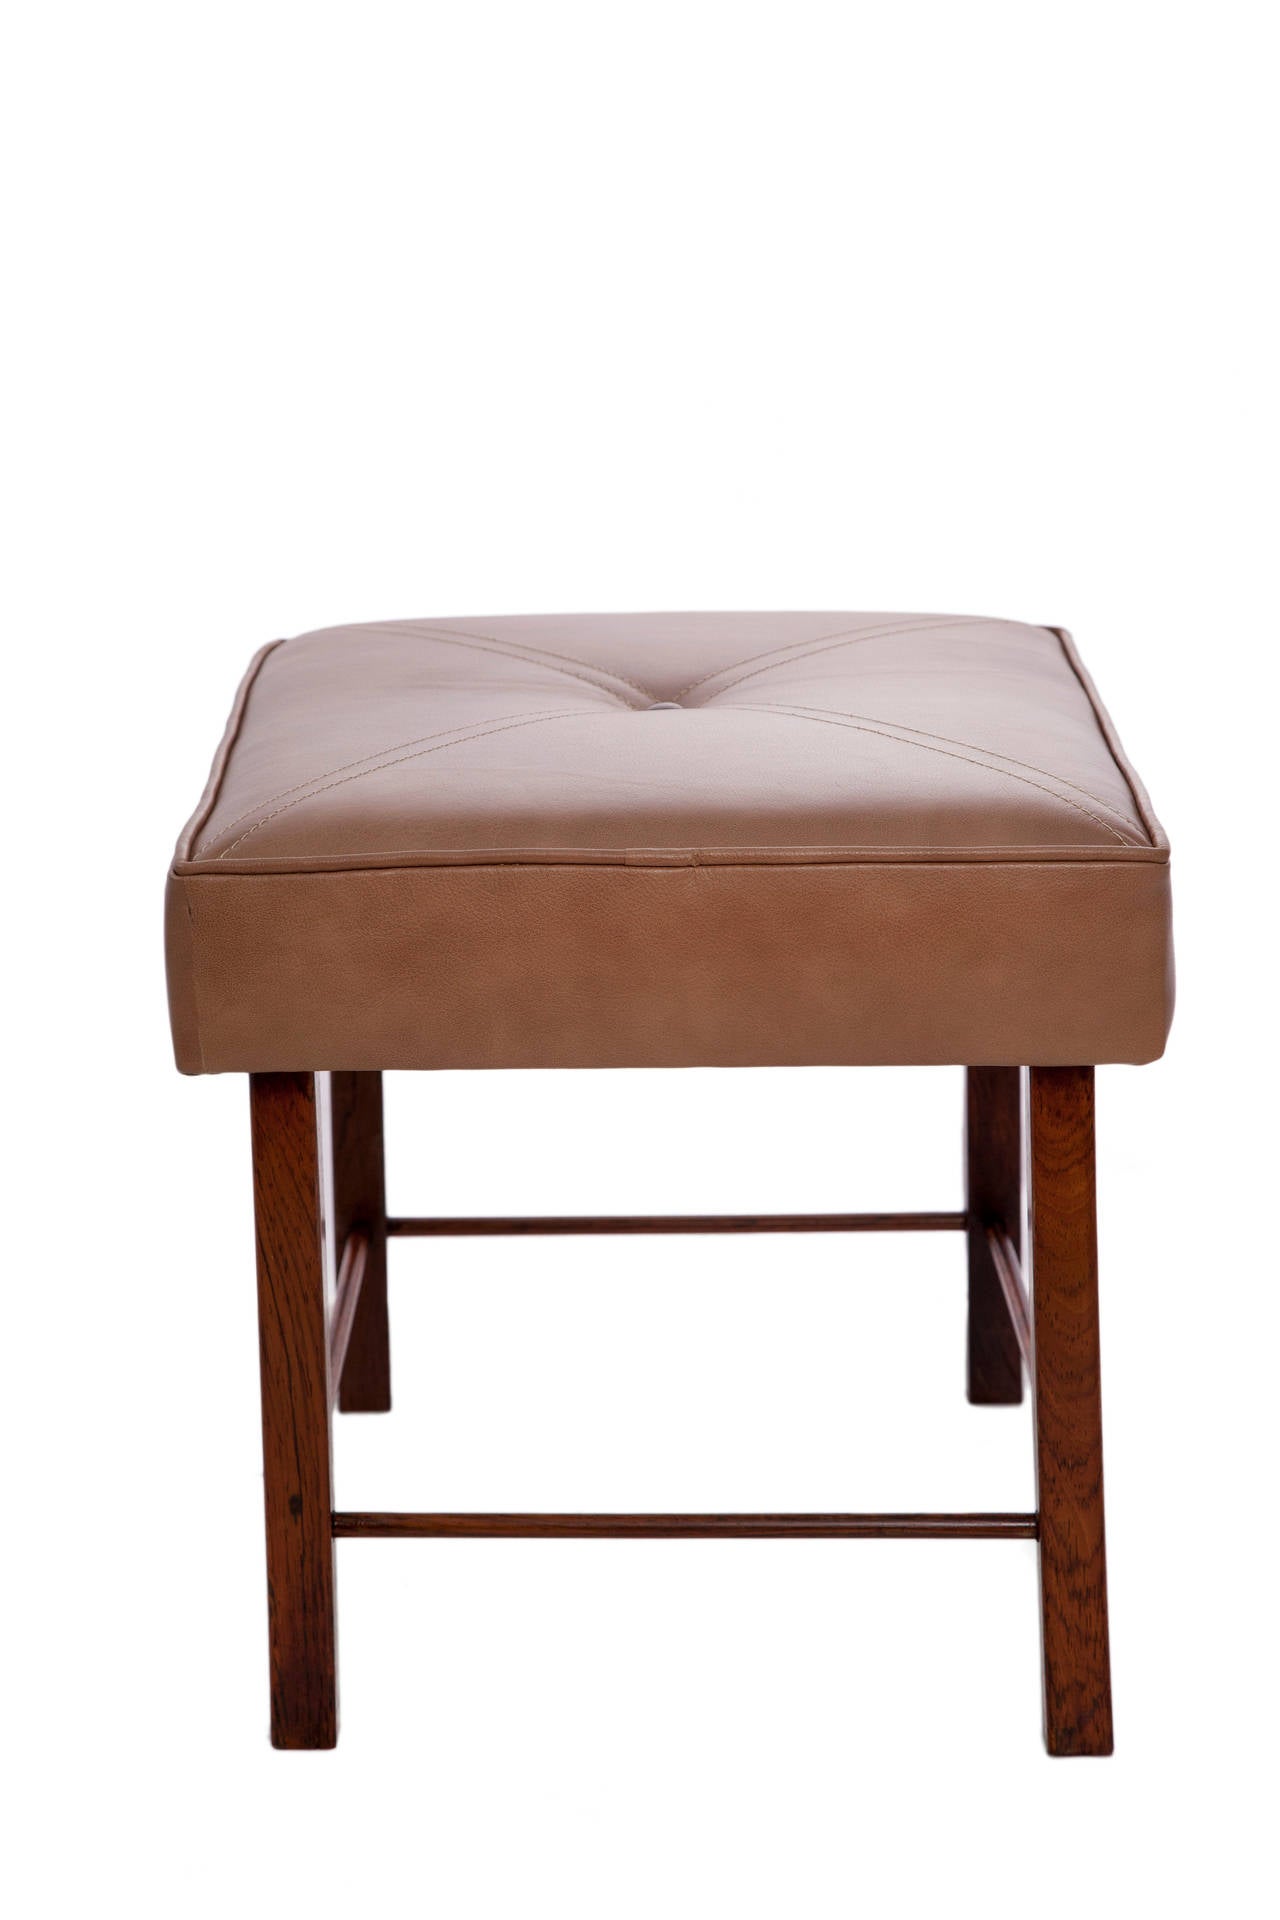 Mid-Century Modern A Midcentury Stool in Jacaranda Wood with Tufted Beige Leather Seat